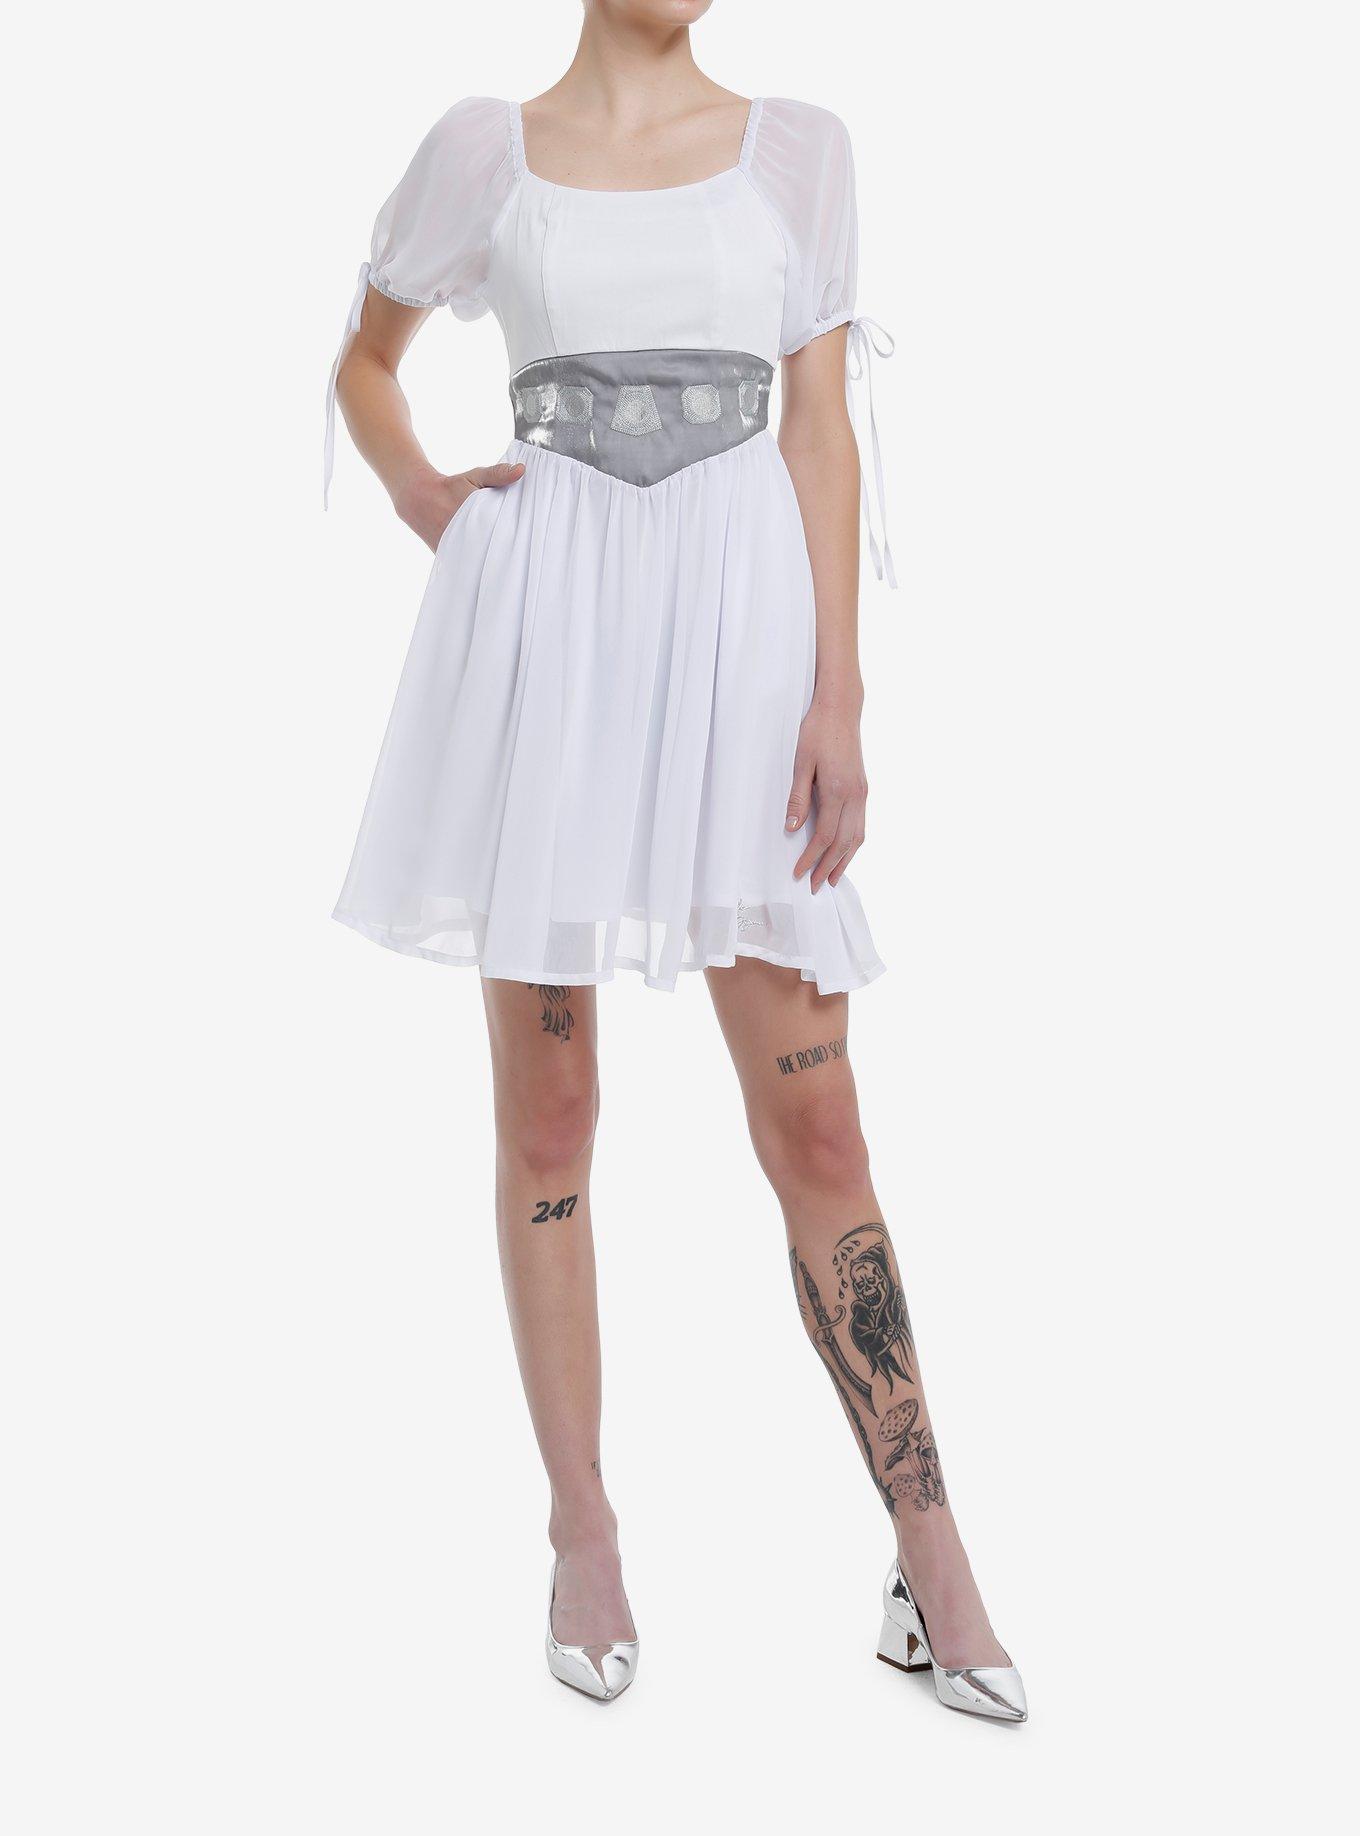 Her Universe Star Wars Princess Leia Puff Sleeve Dress Her Universe Exclusive, BRIGHT WHITE, alternate